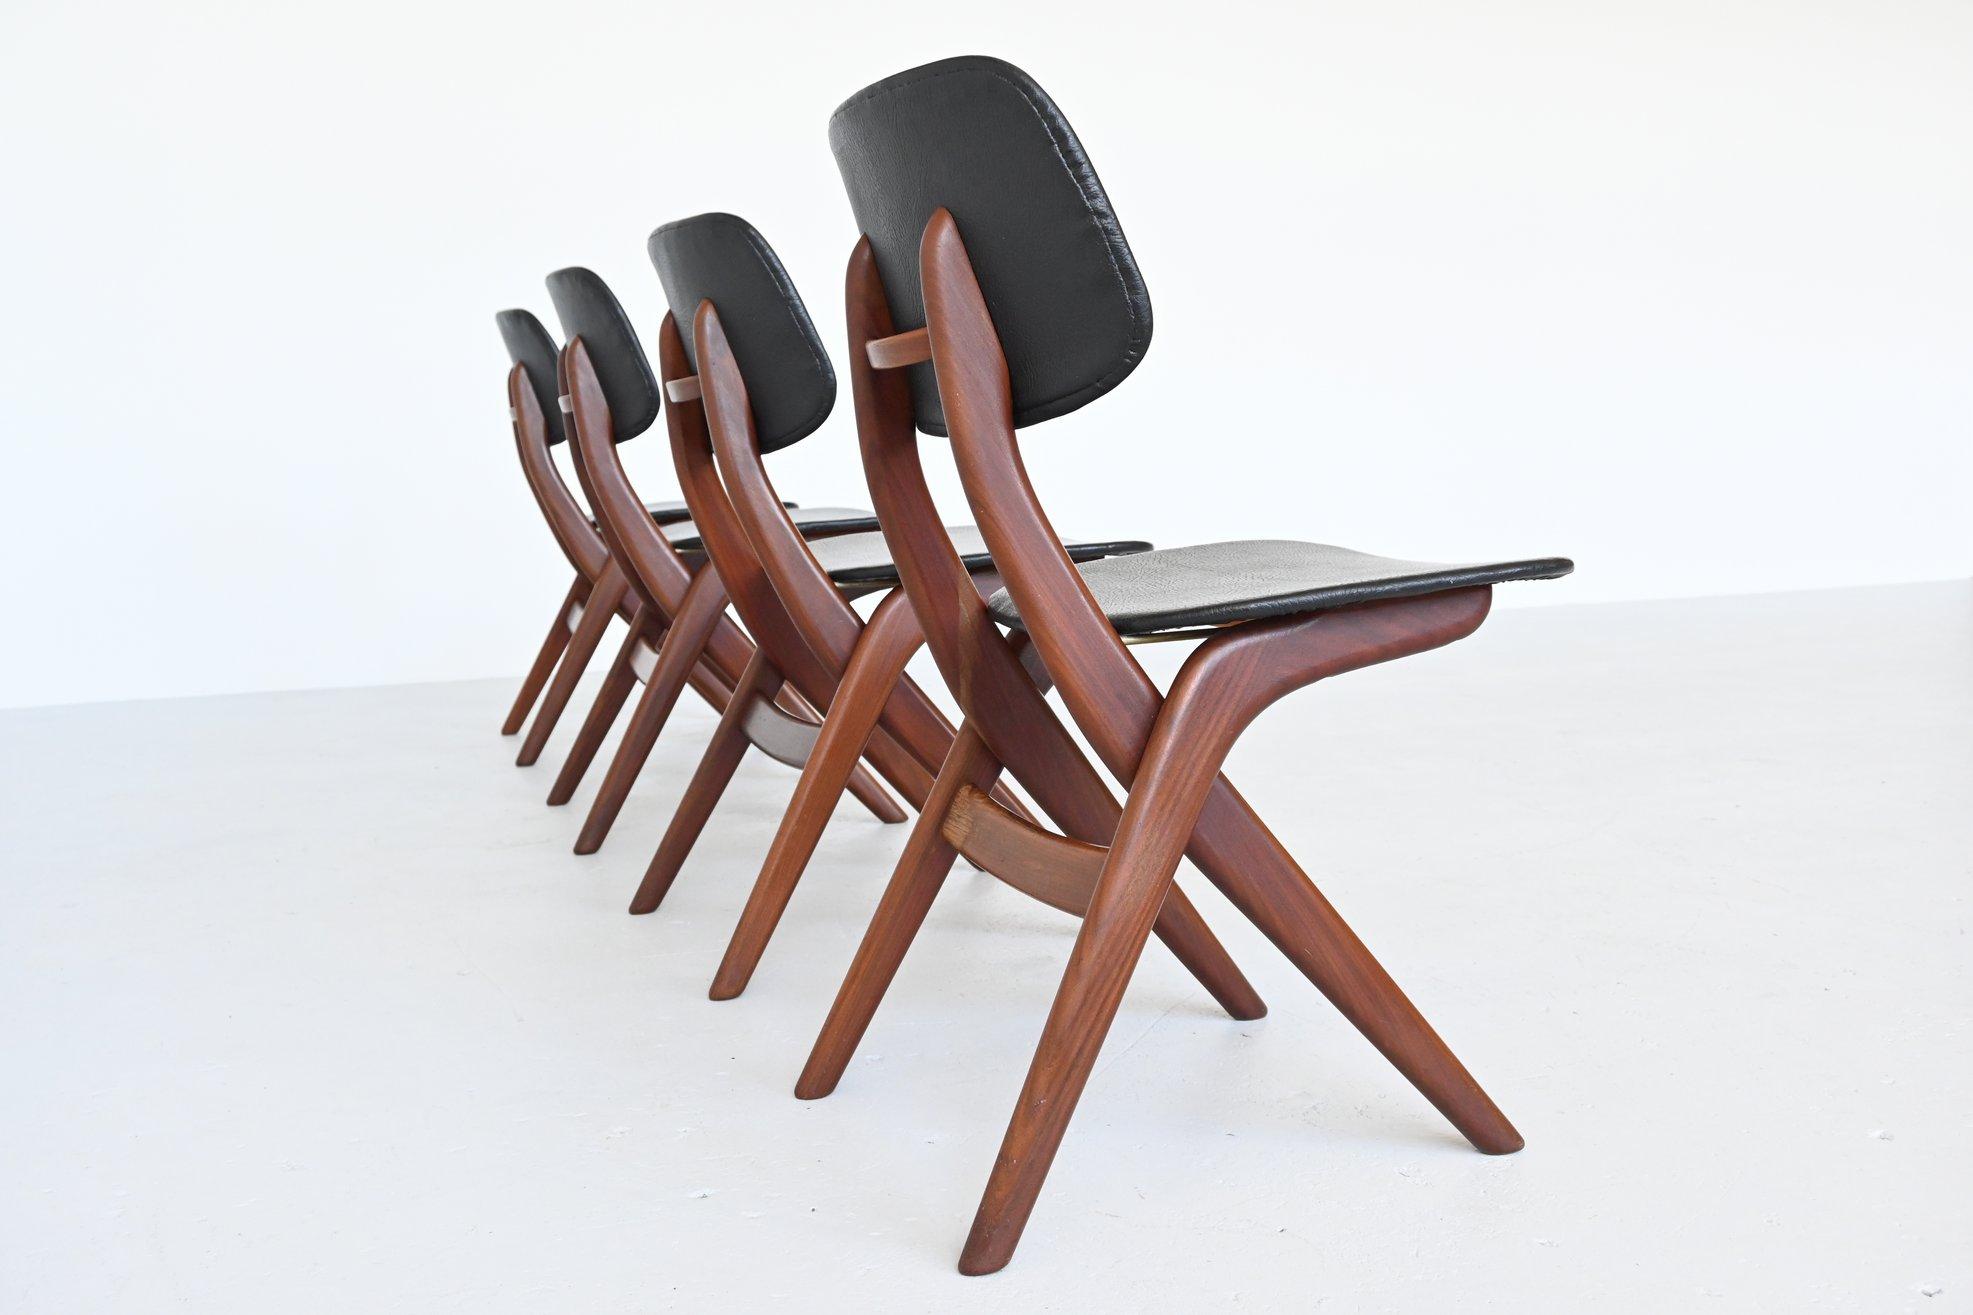 Very nicely shaped Pelican chairs designed by Louis Van Teeffelen for Wébé, The Netherlands 1960. The chairs are made of solid teak wood and has black original faux leather upholstery. They seat very comfortable and give good support in the